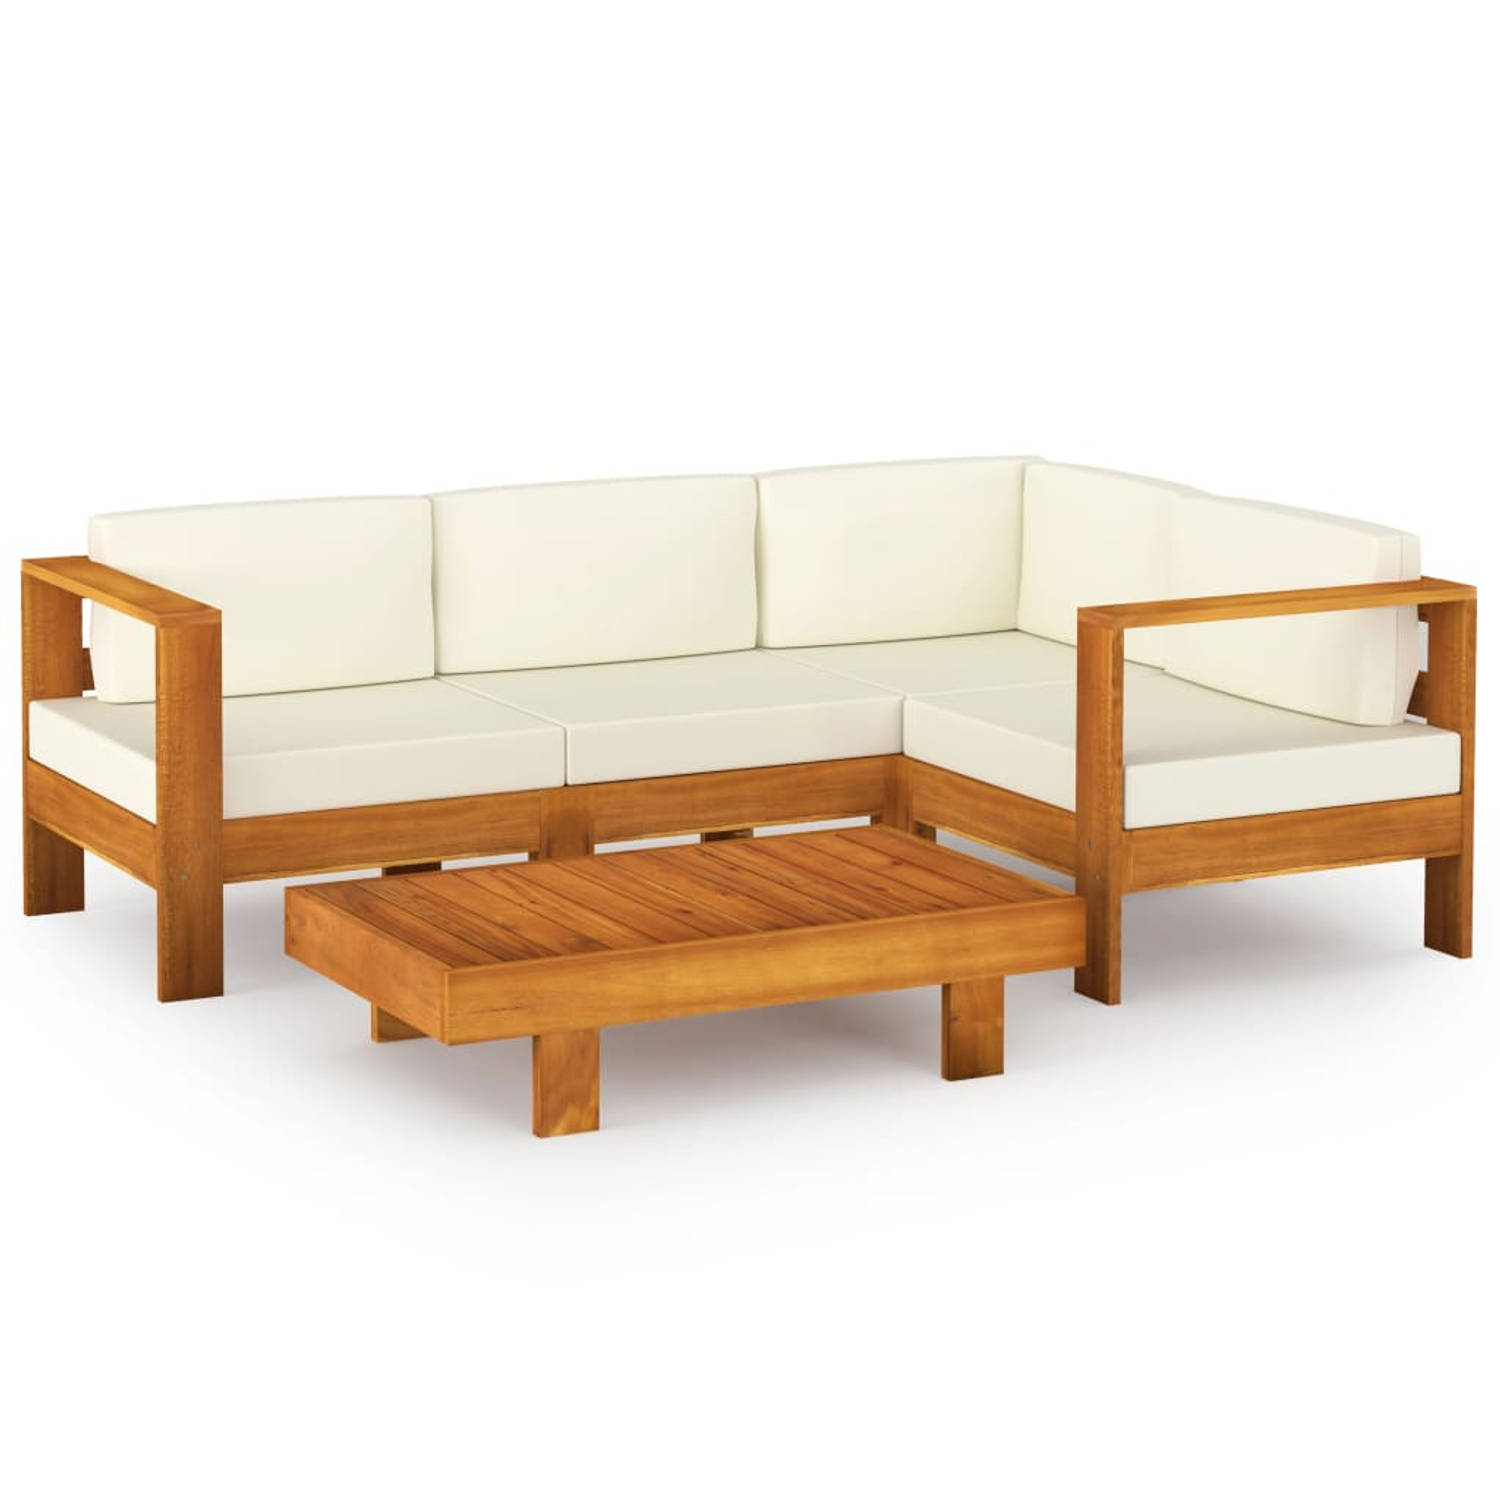 The Living Store 5-delige Loungeset met crèmewitte kussens acaciahout - Tuinset